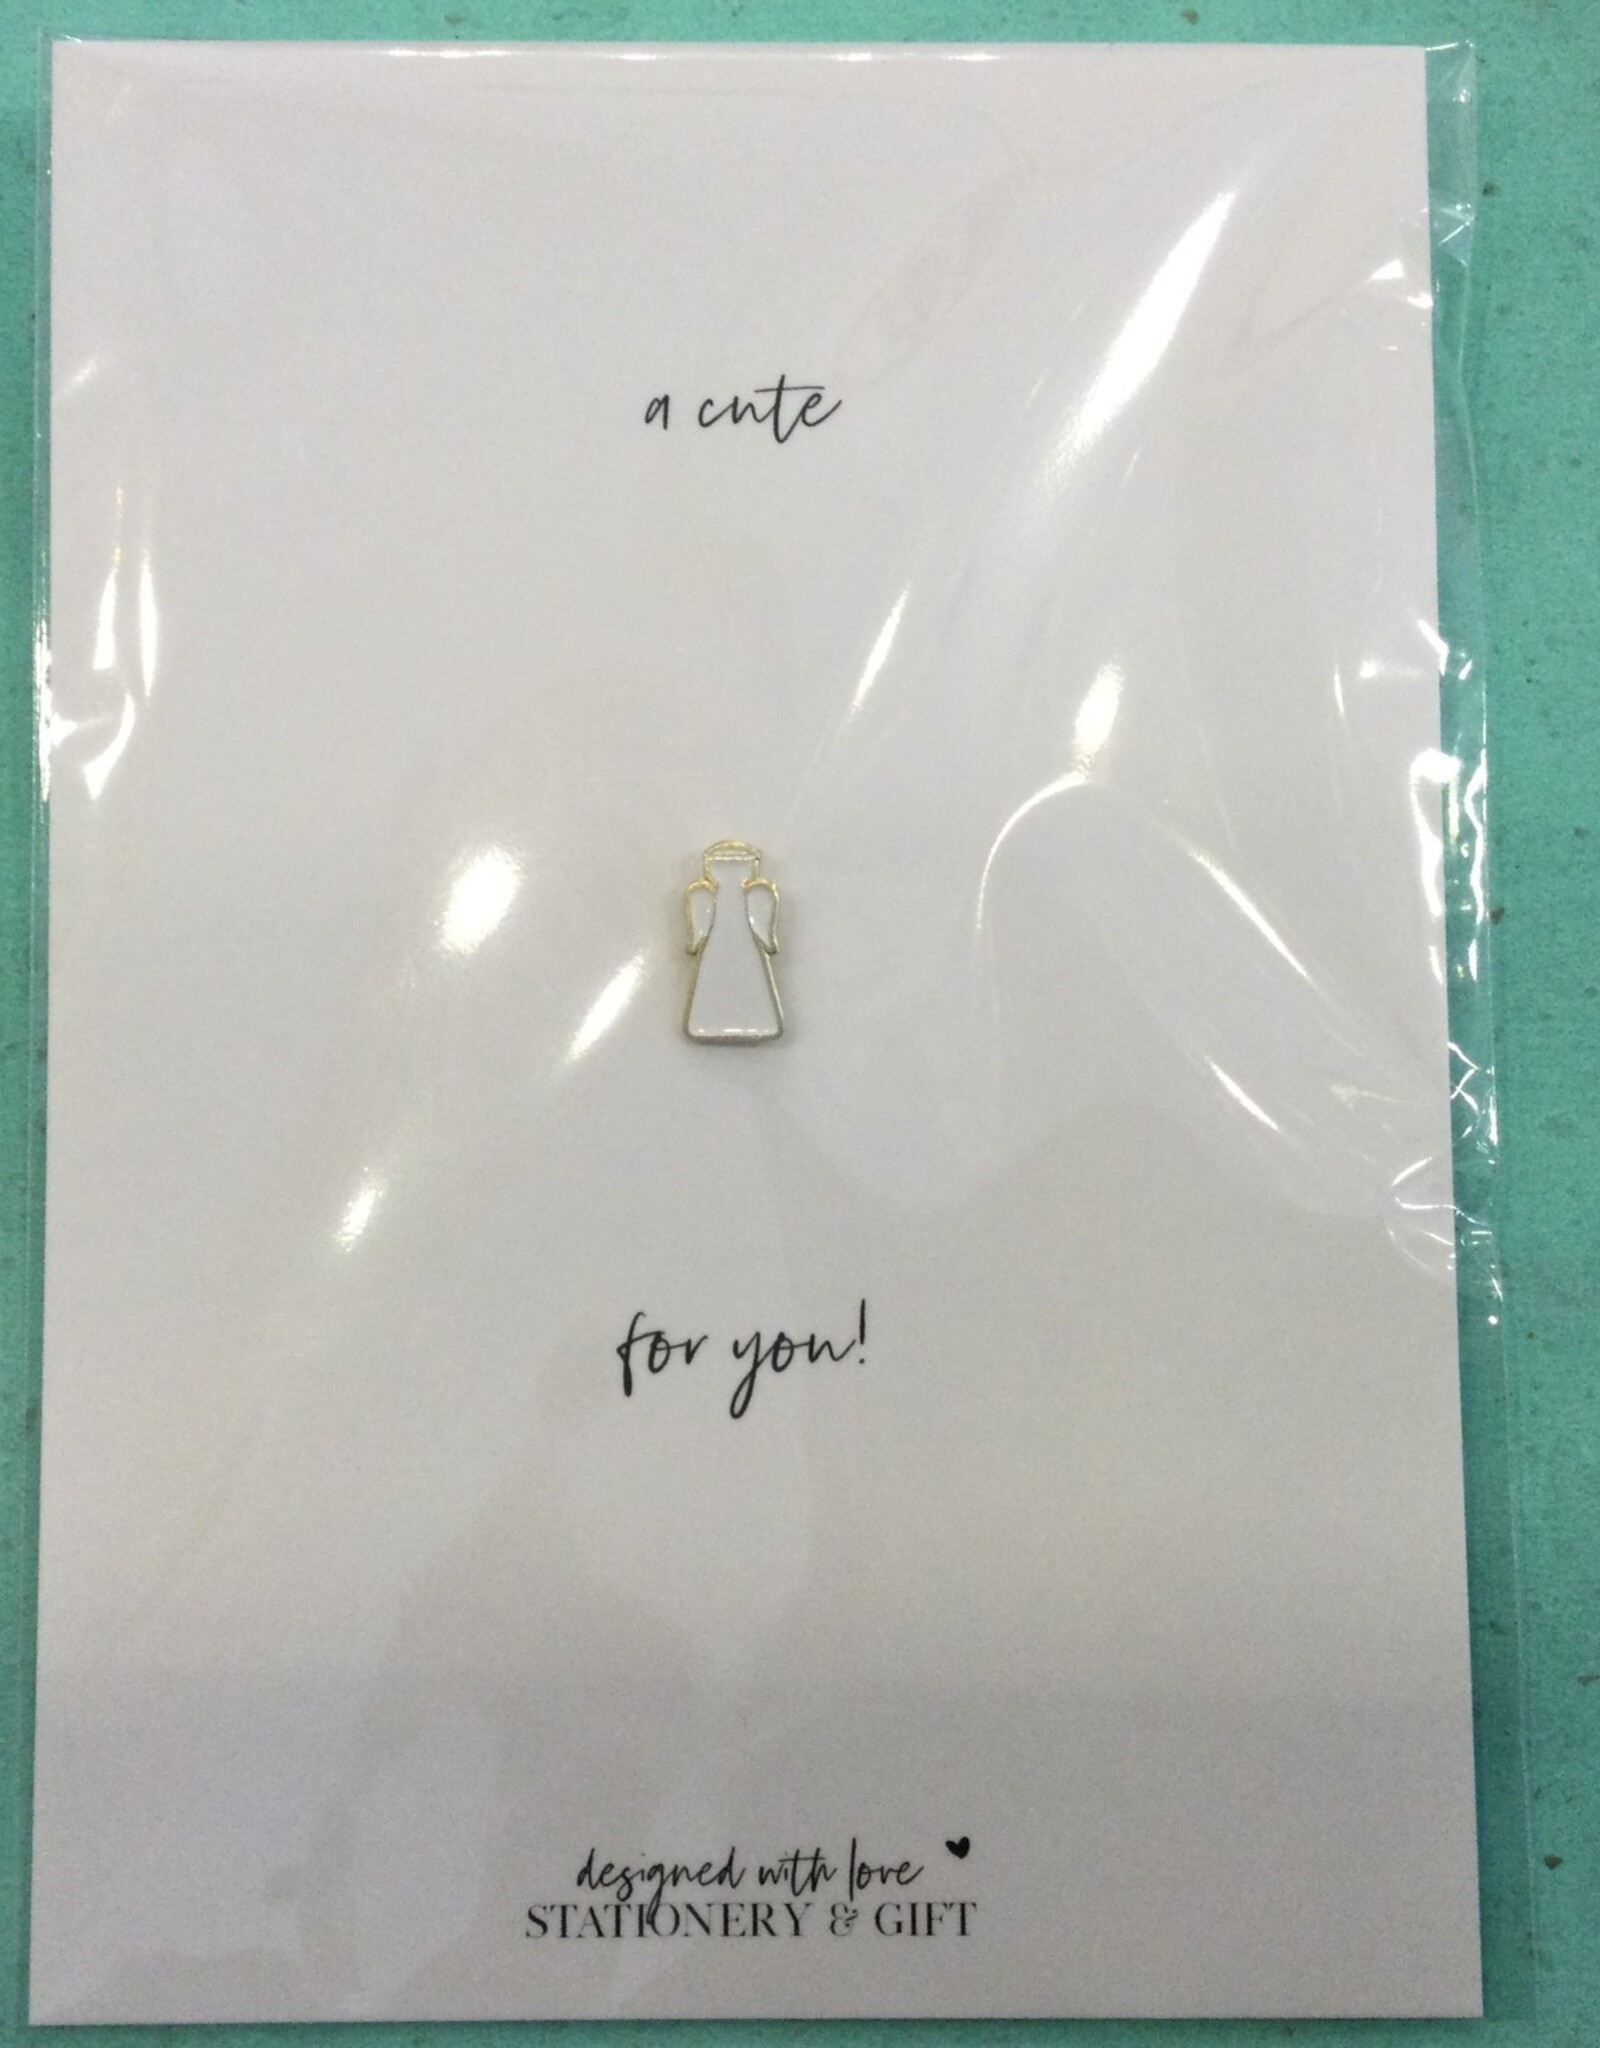 Pin "A Cute little Angel for you!" (incl envelop)